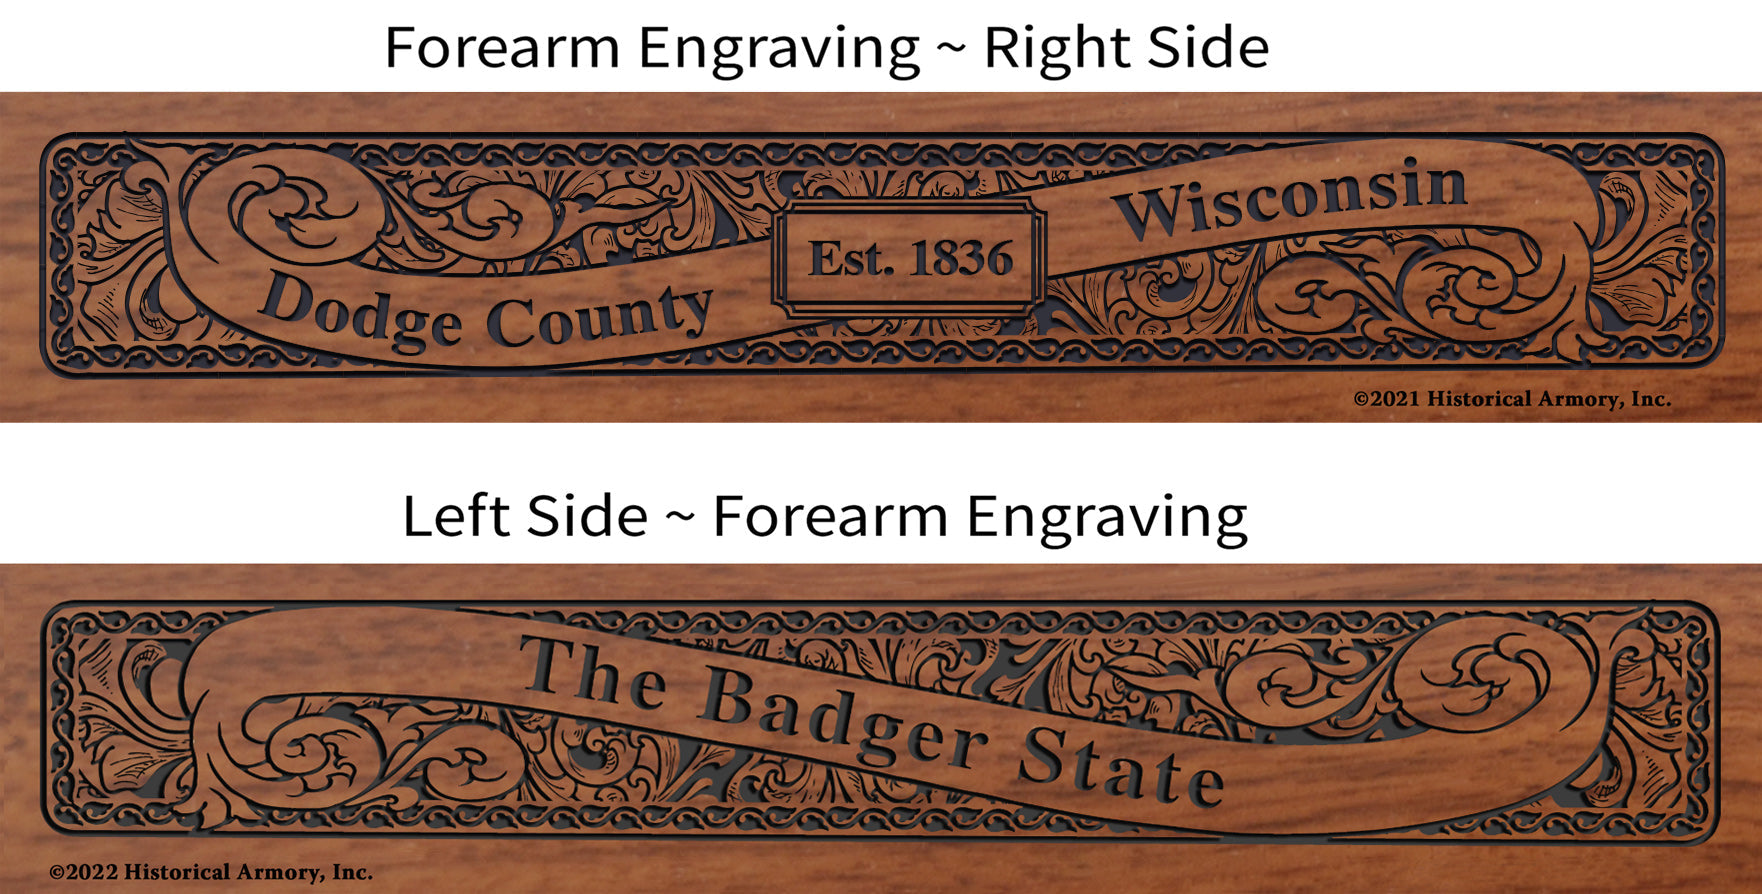 Dodge County Wisconsin Engraved Rifle Forearm